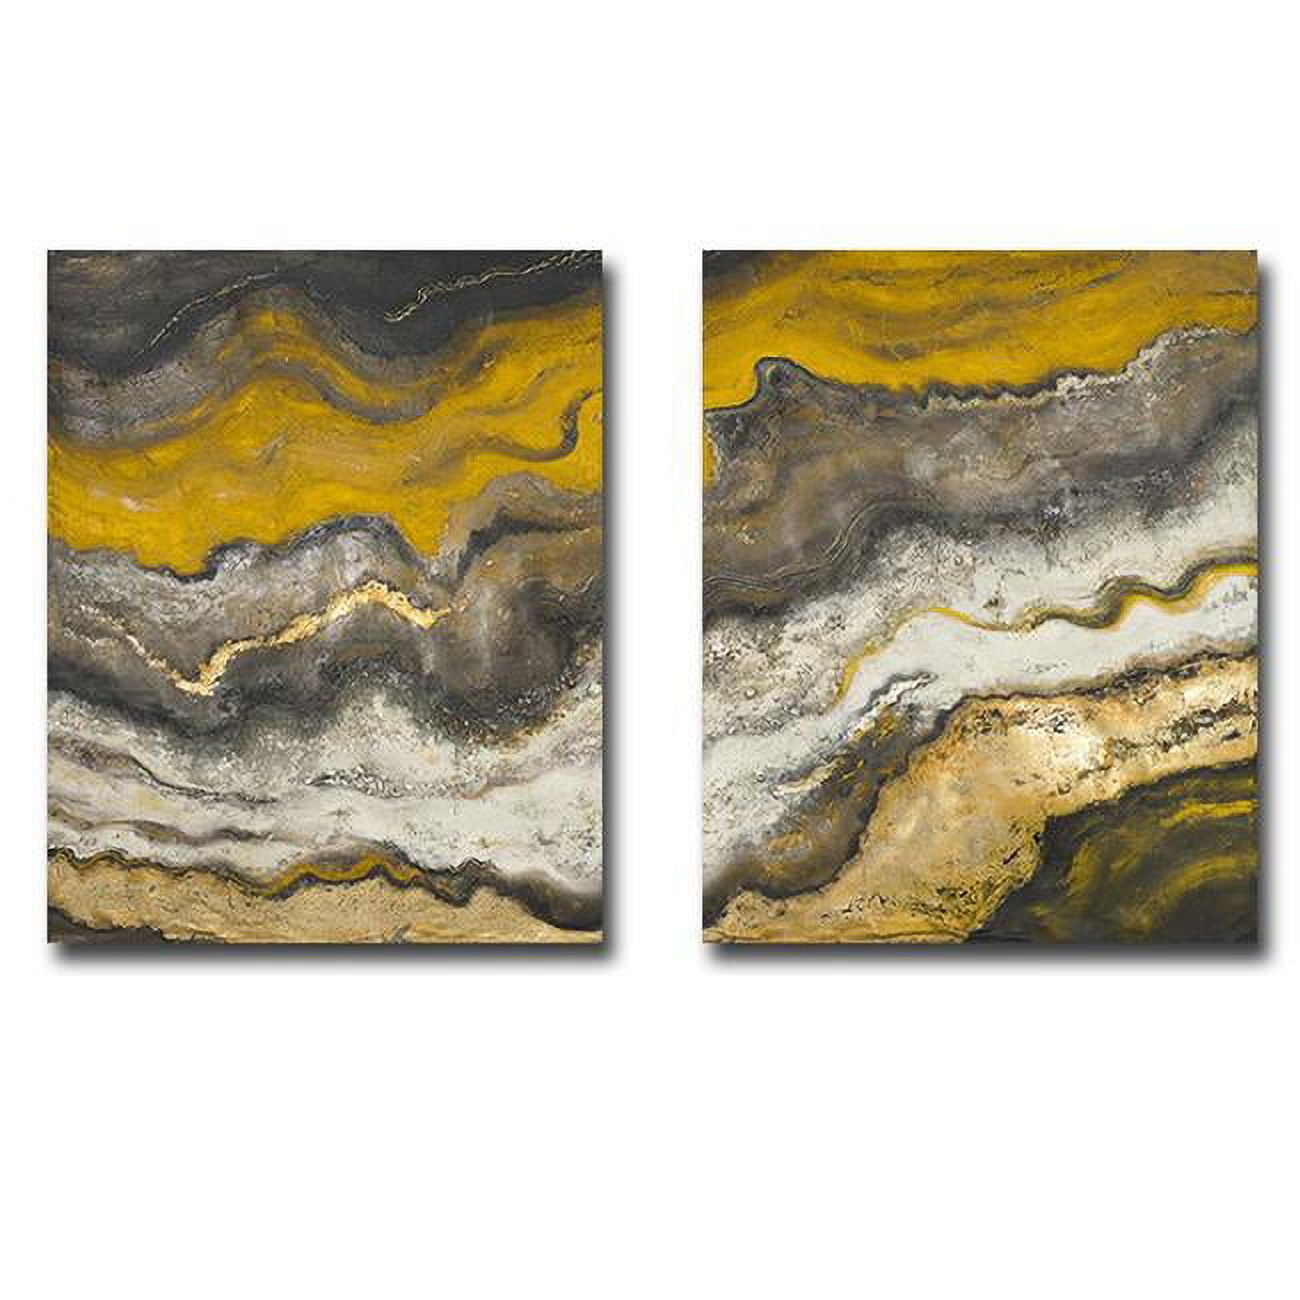 Lava Flow I & II by Patricia Pinto Premium Gallery-Wrapped Canvas Giclee Art Set - Ready-to-Hang, 16 x 20 x 1.5 in -  PerfectPillows, PE968939